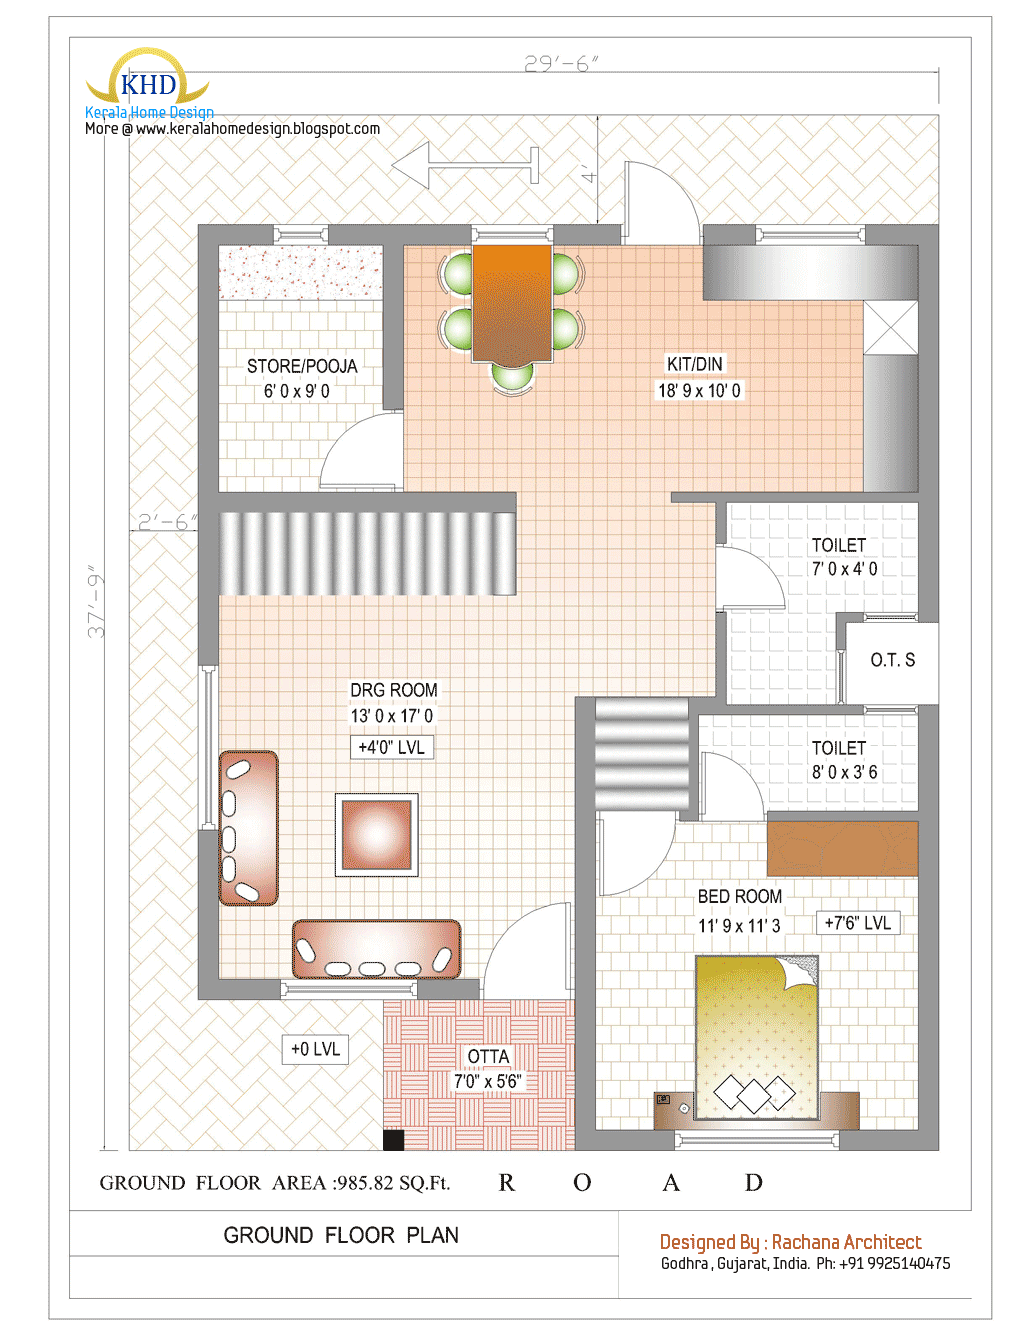  Duplex  House  Plan  and Elevation 1770 Sq  Ft  Indian  